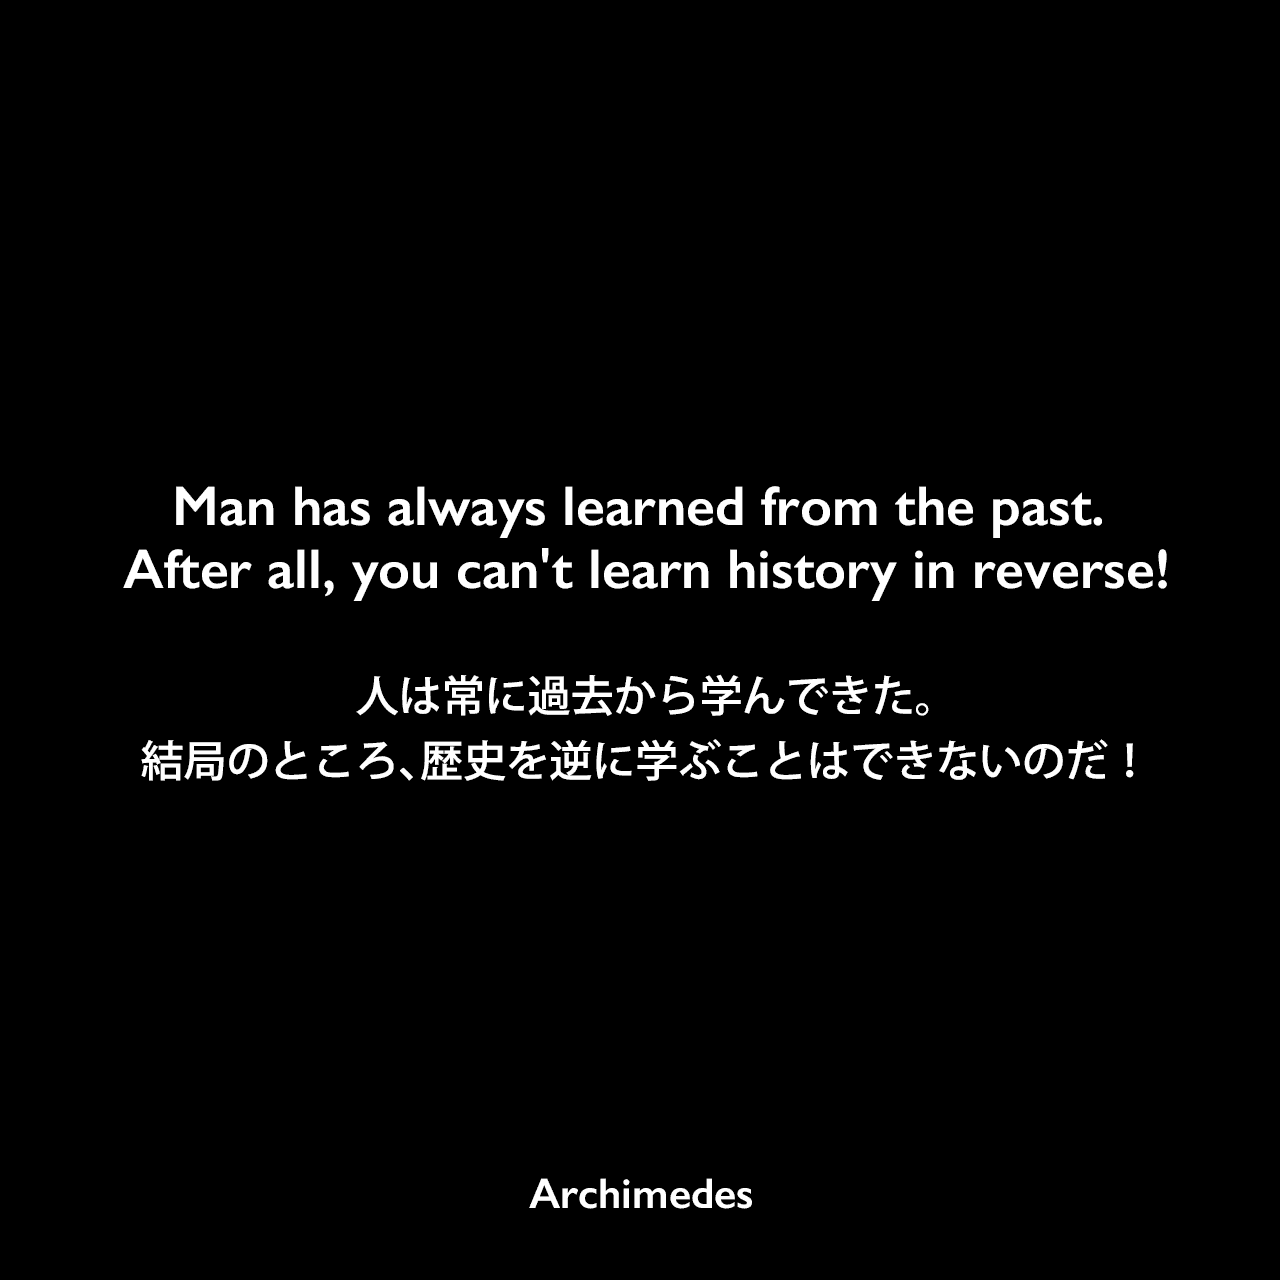 Man has always learned from the past. After all, you can't learn history in reverse!人は常に過去から学んできた。結局のところ、歴史を逆に学ぶことはできないのだ！Archimedes